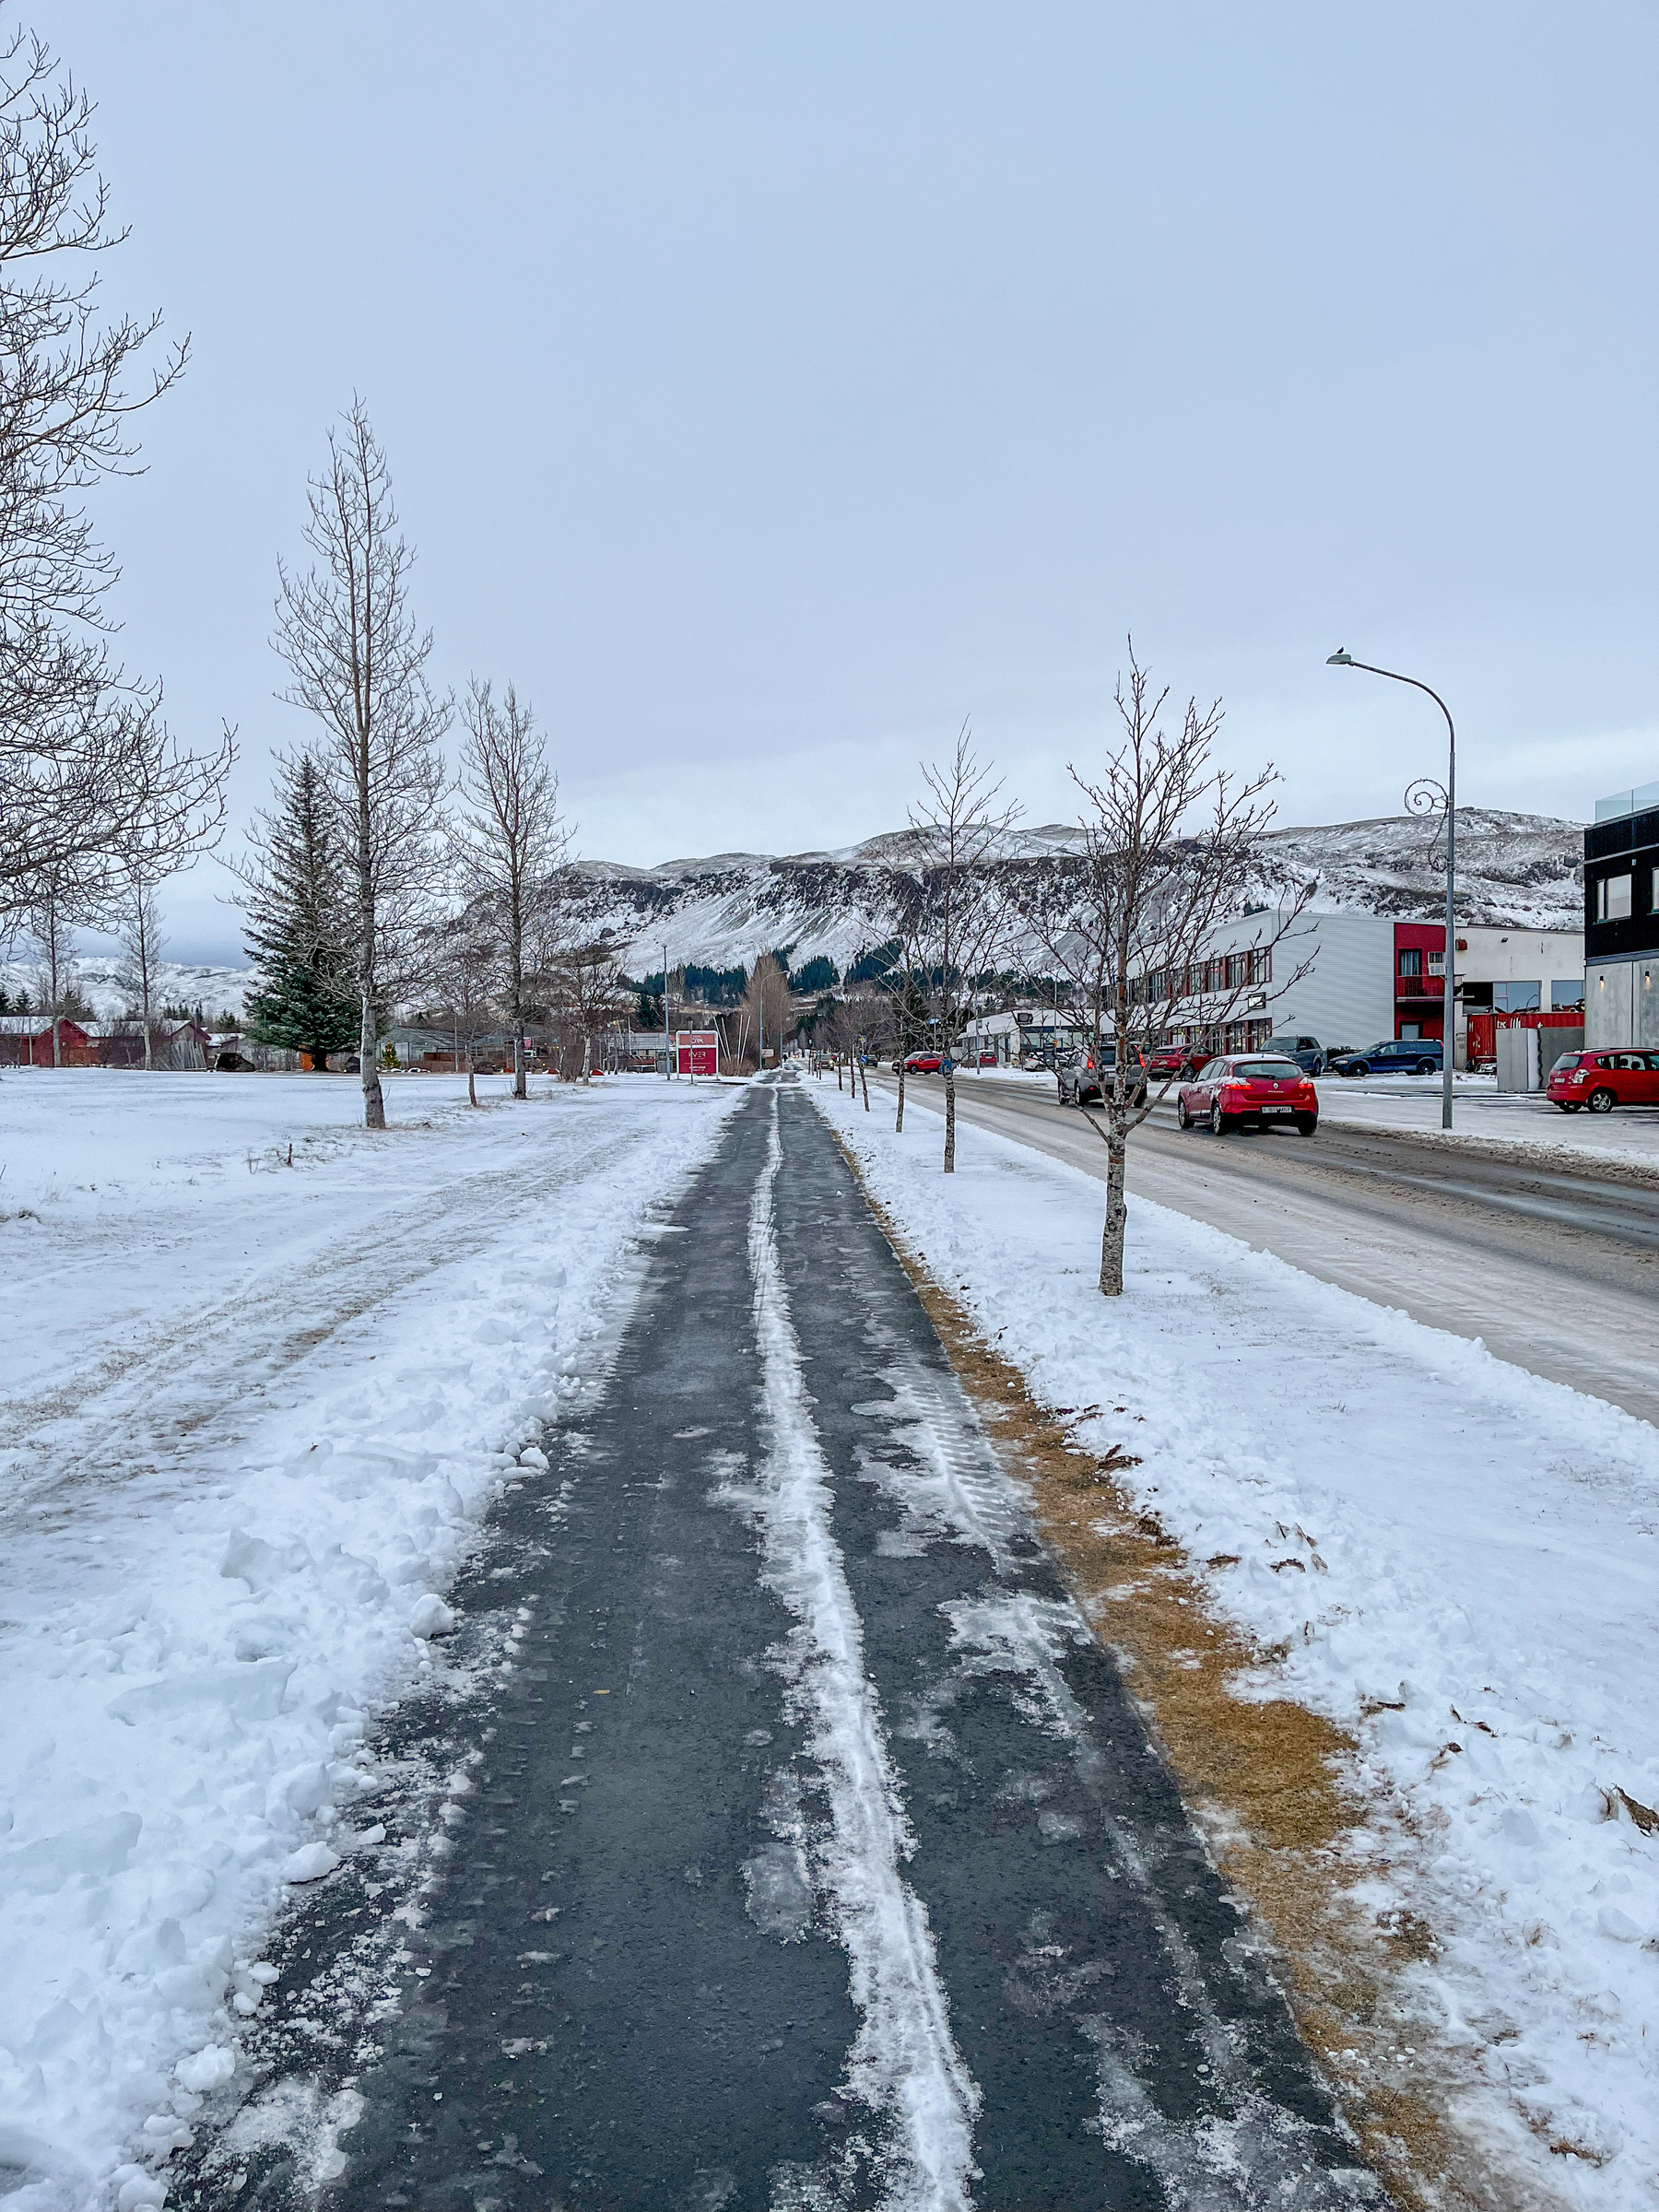 A view down Hveragerði’s main road. Snow all over